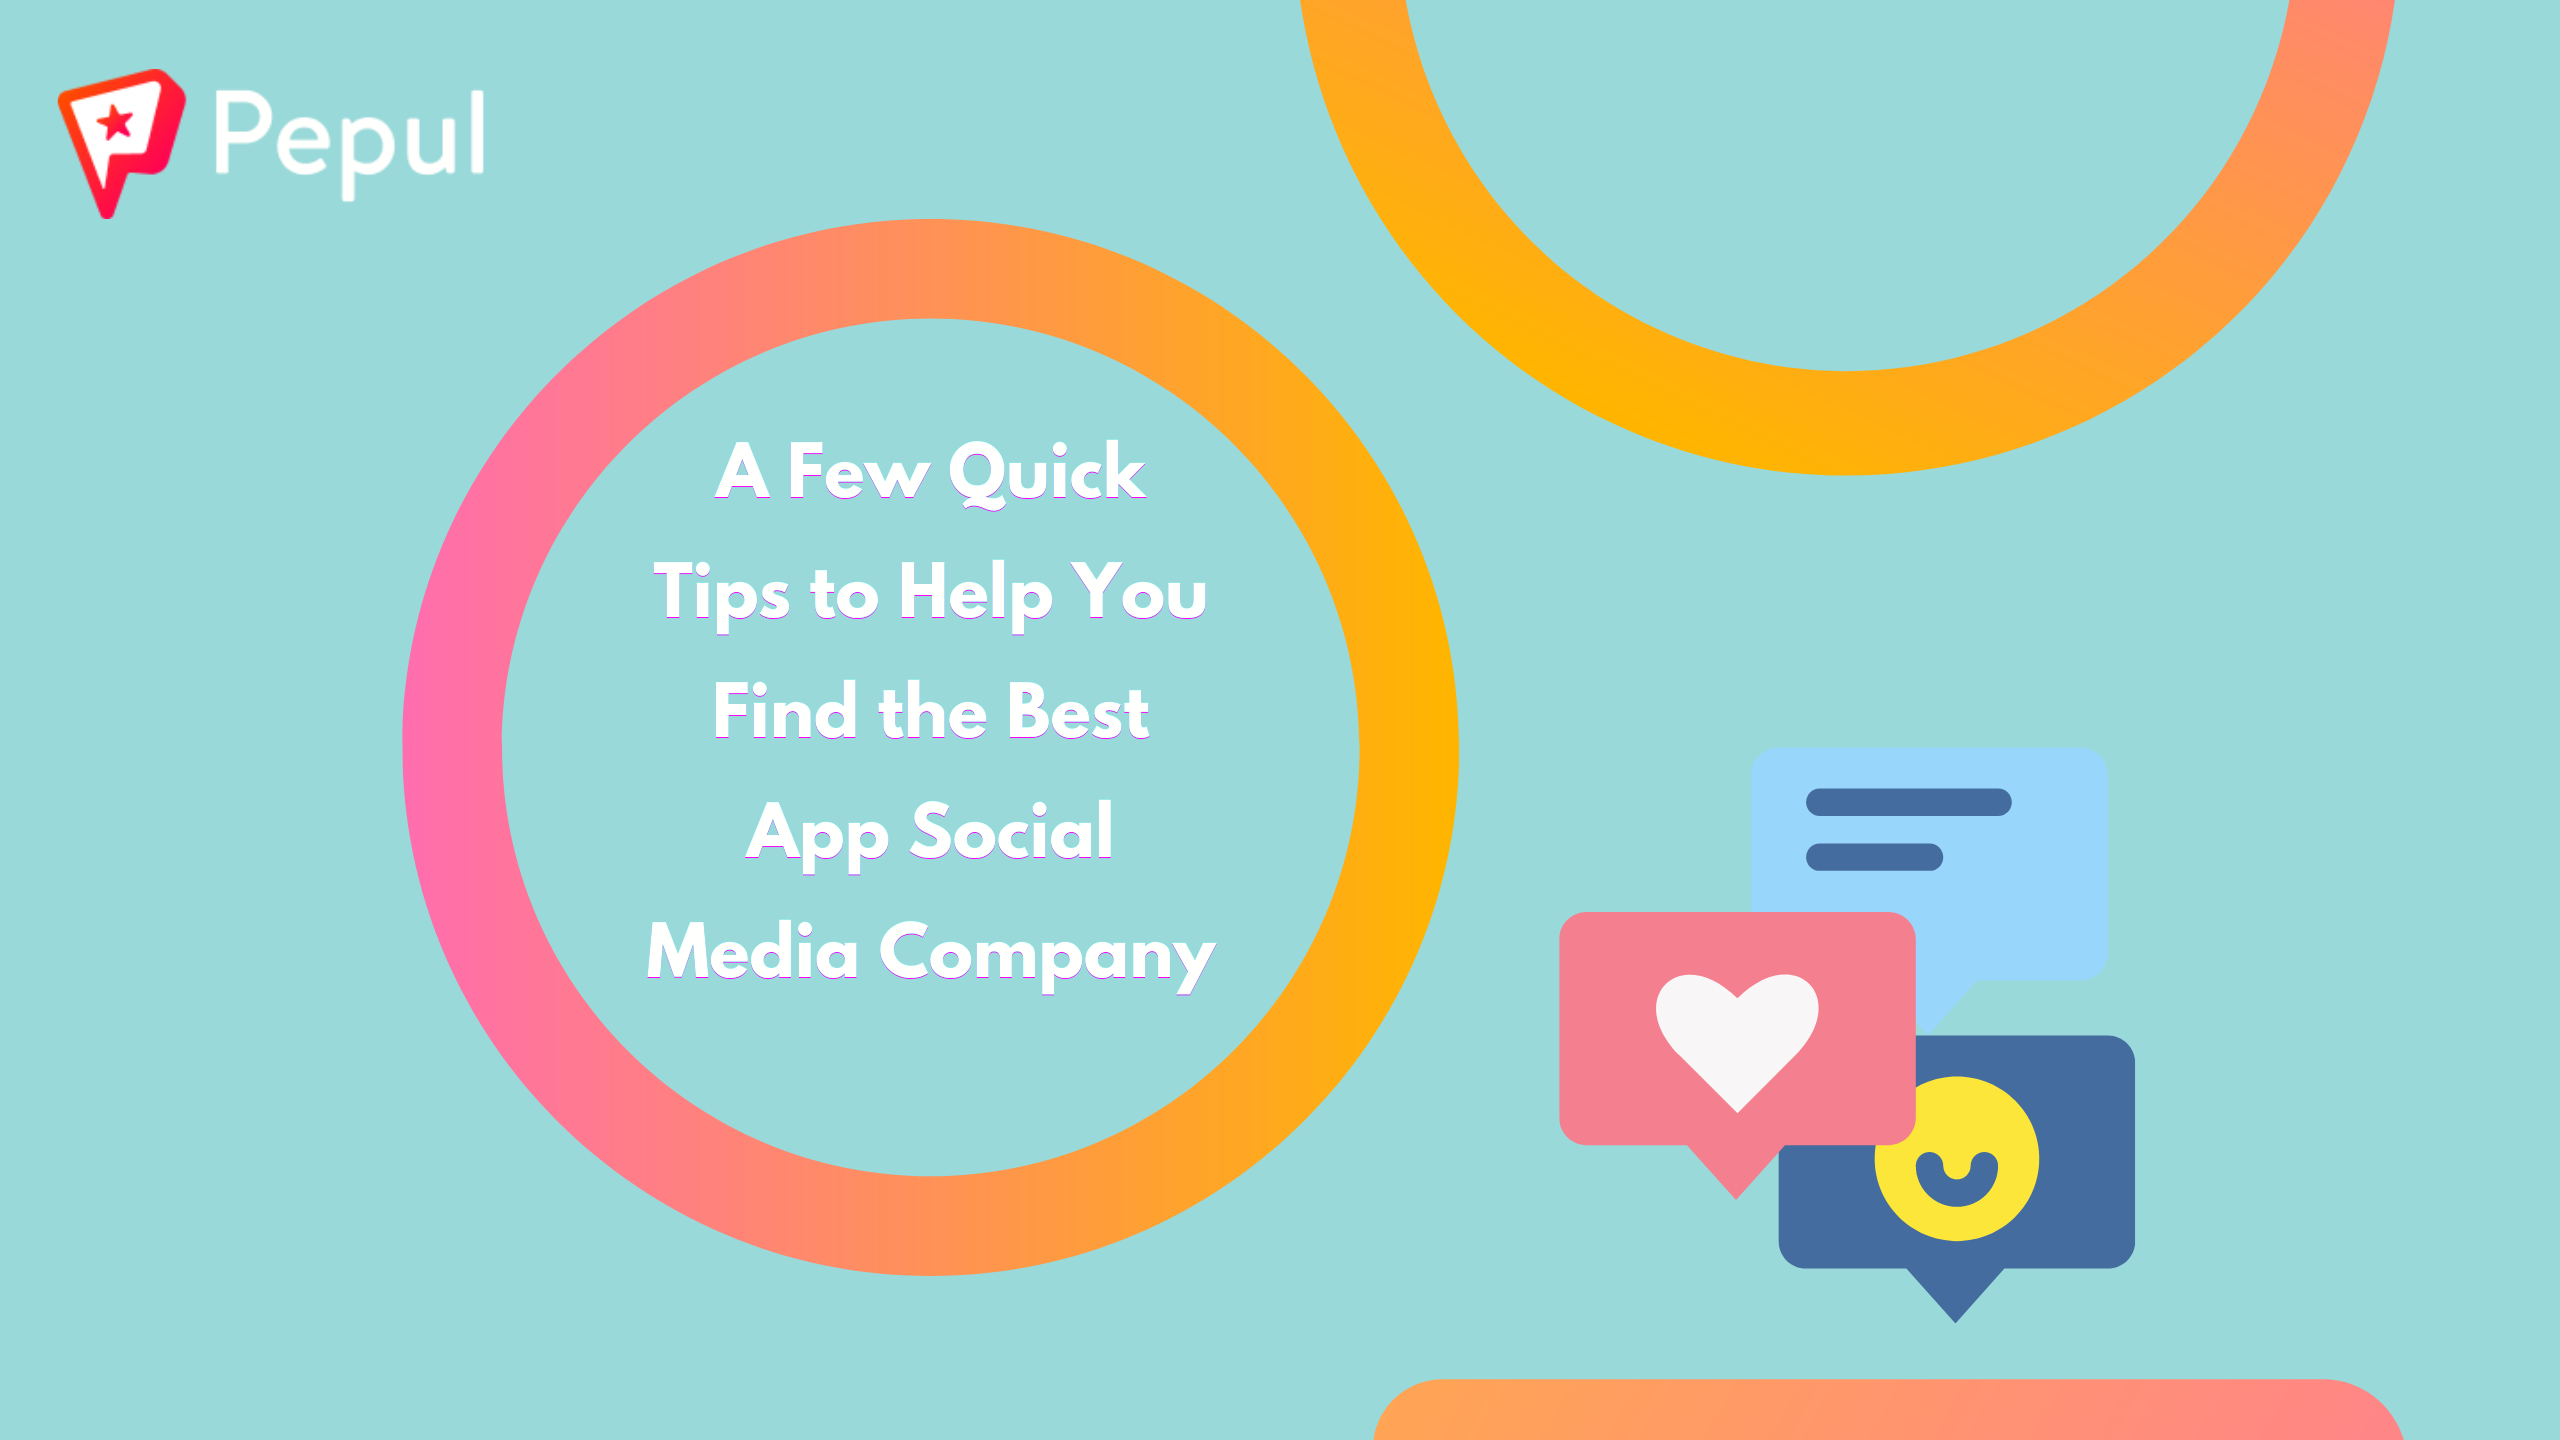 Few Quick Tips to Find the Best App Social Media Company